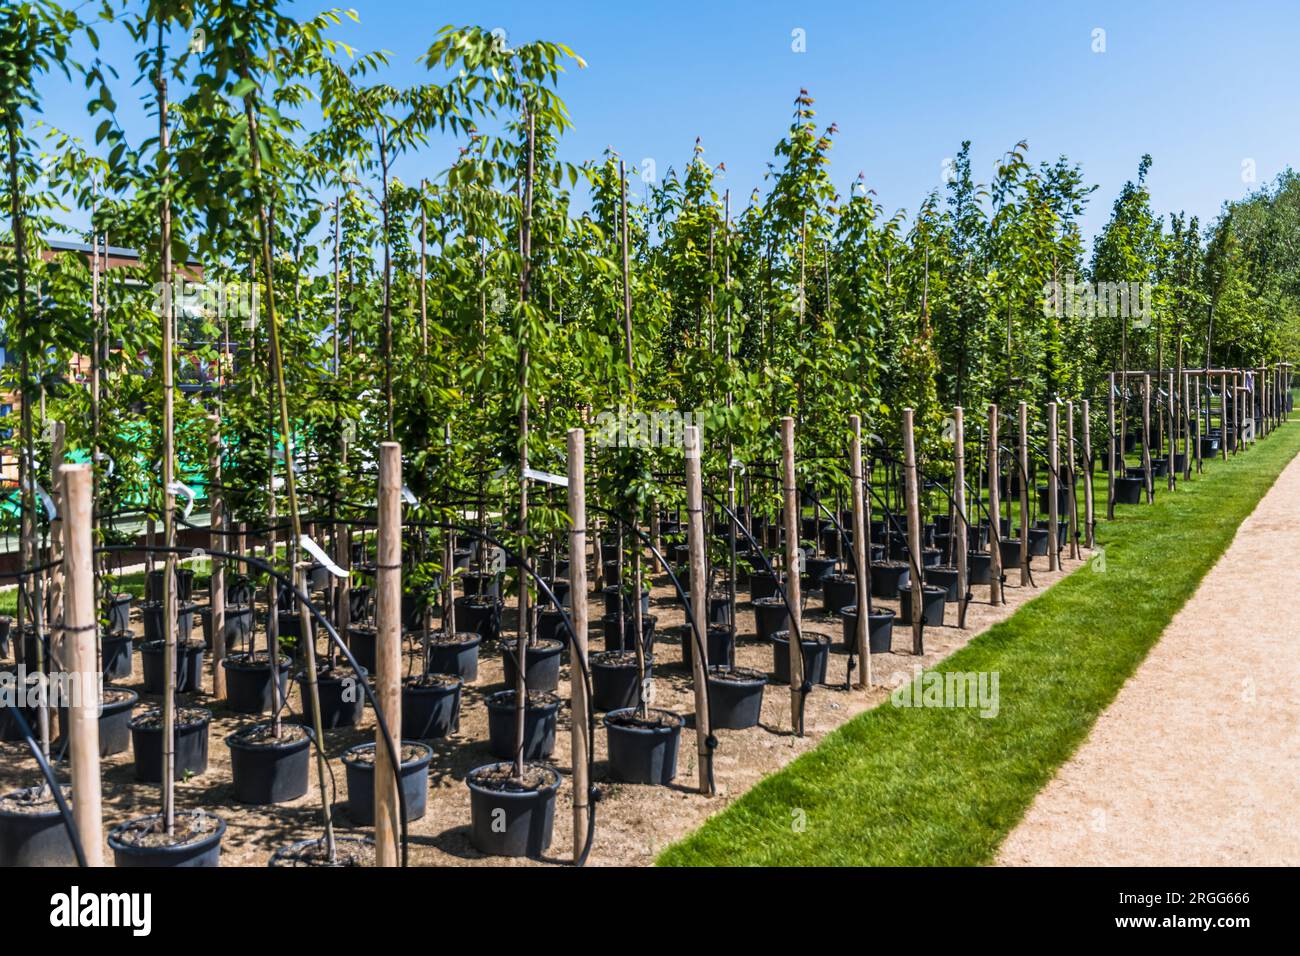 Rows of young trees in plastic pots with water irrigation system in a tree nursery, plant nursery Stock Photo